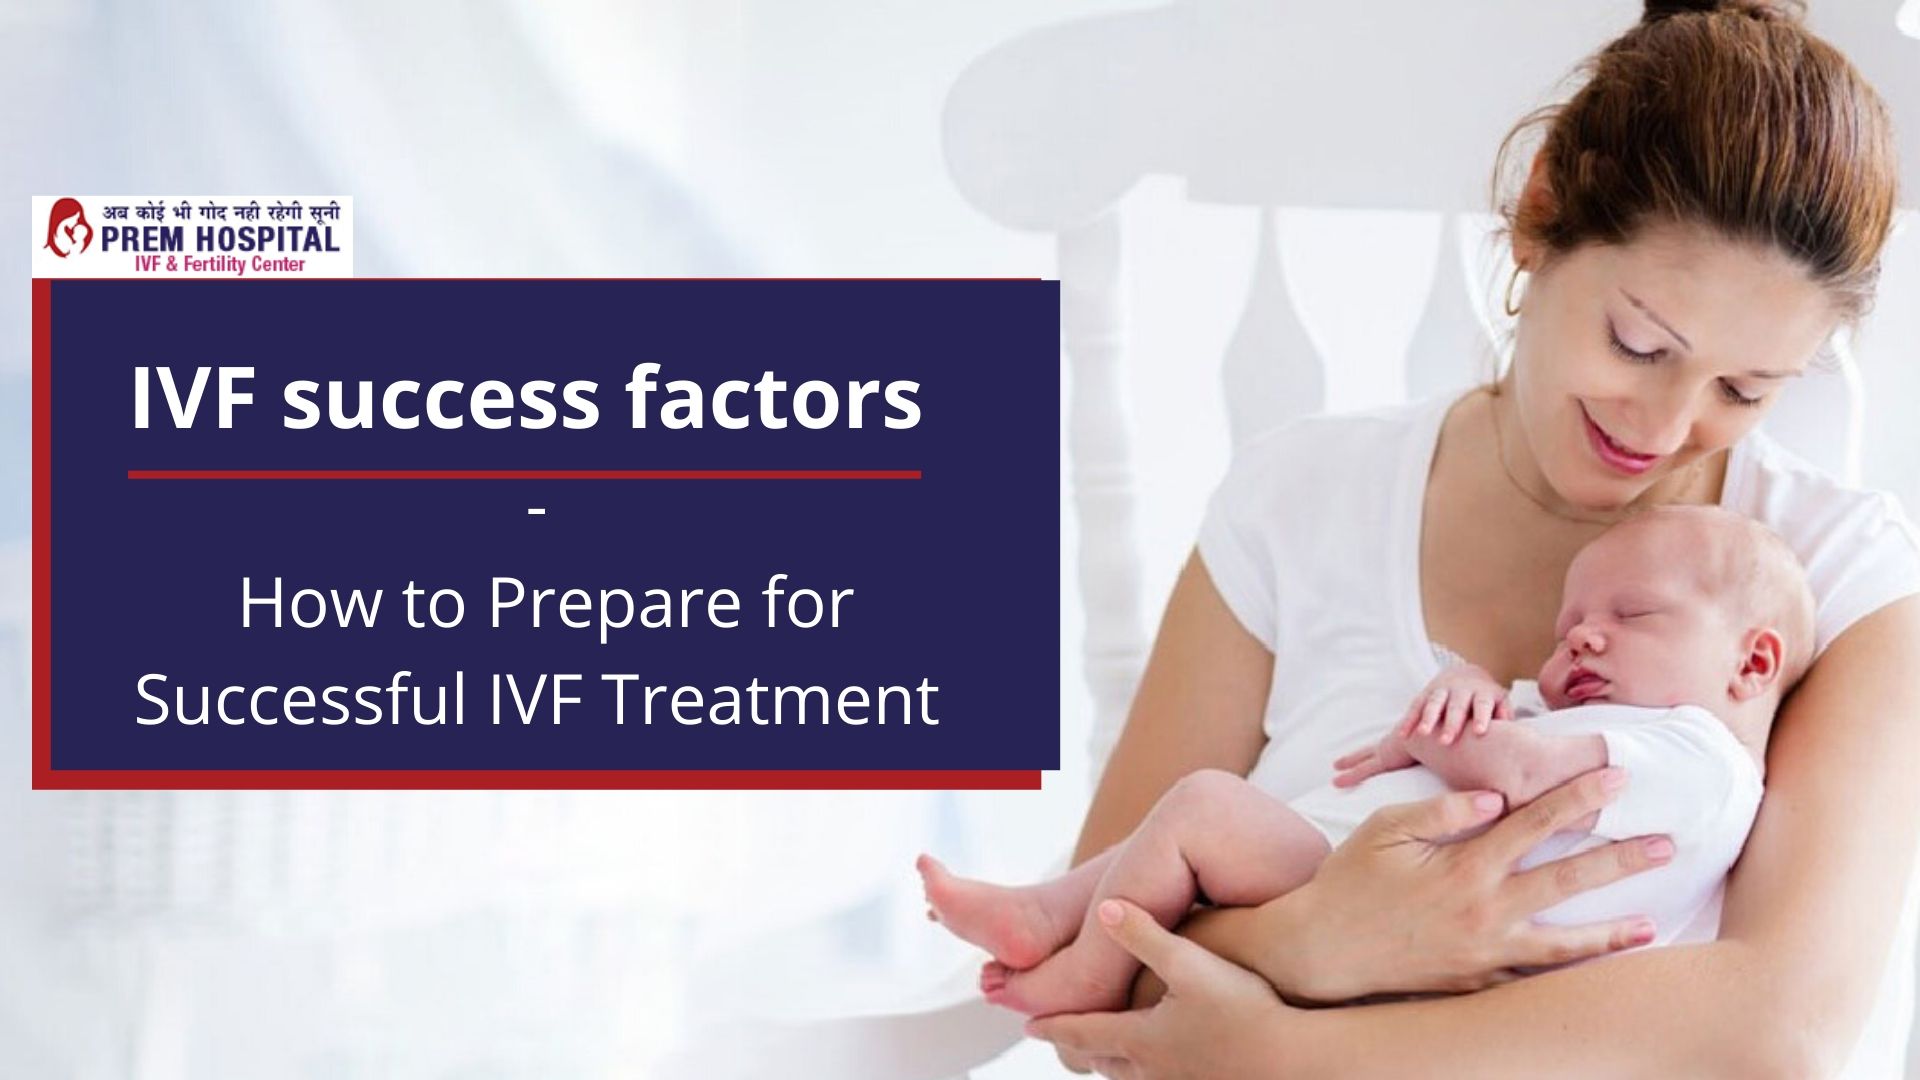 How To Prepare For Successful IVF Treatment - IVF Success Factors